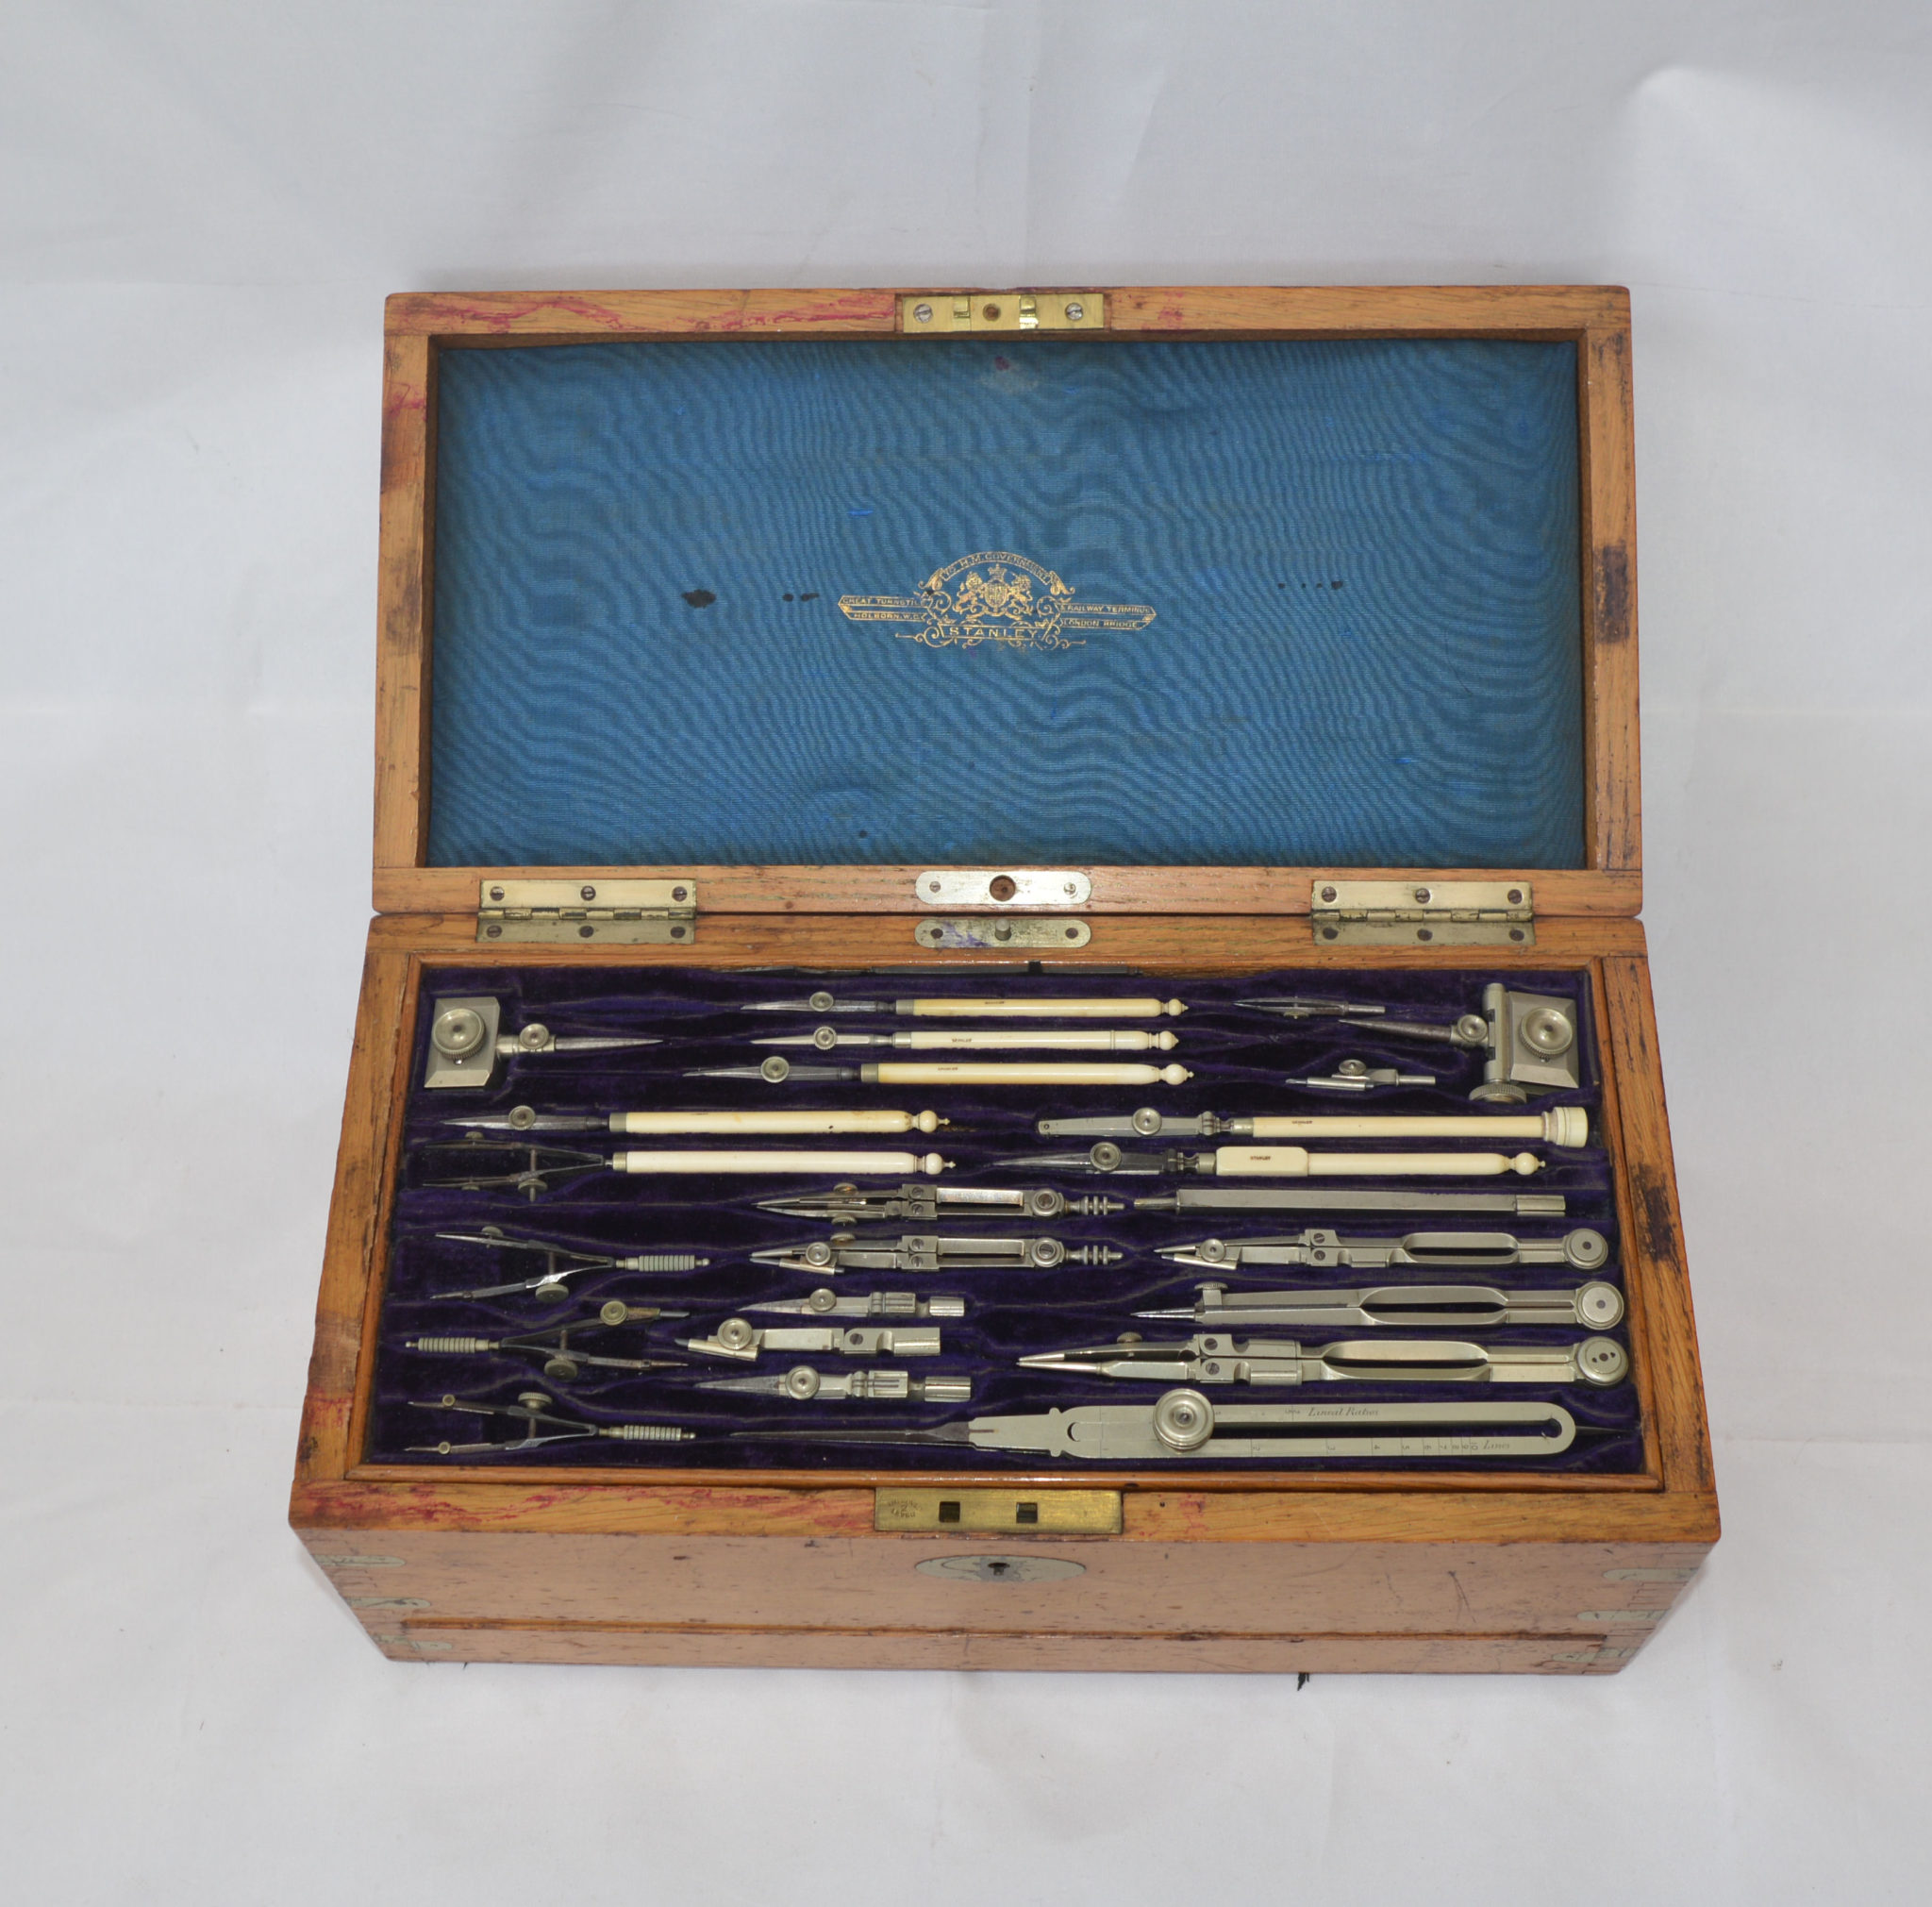 SOLD – A large set of drawing instruments by Stanley.